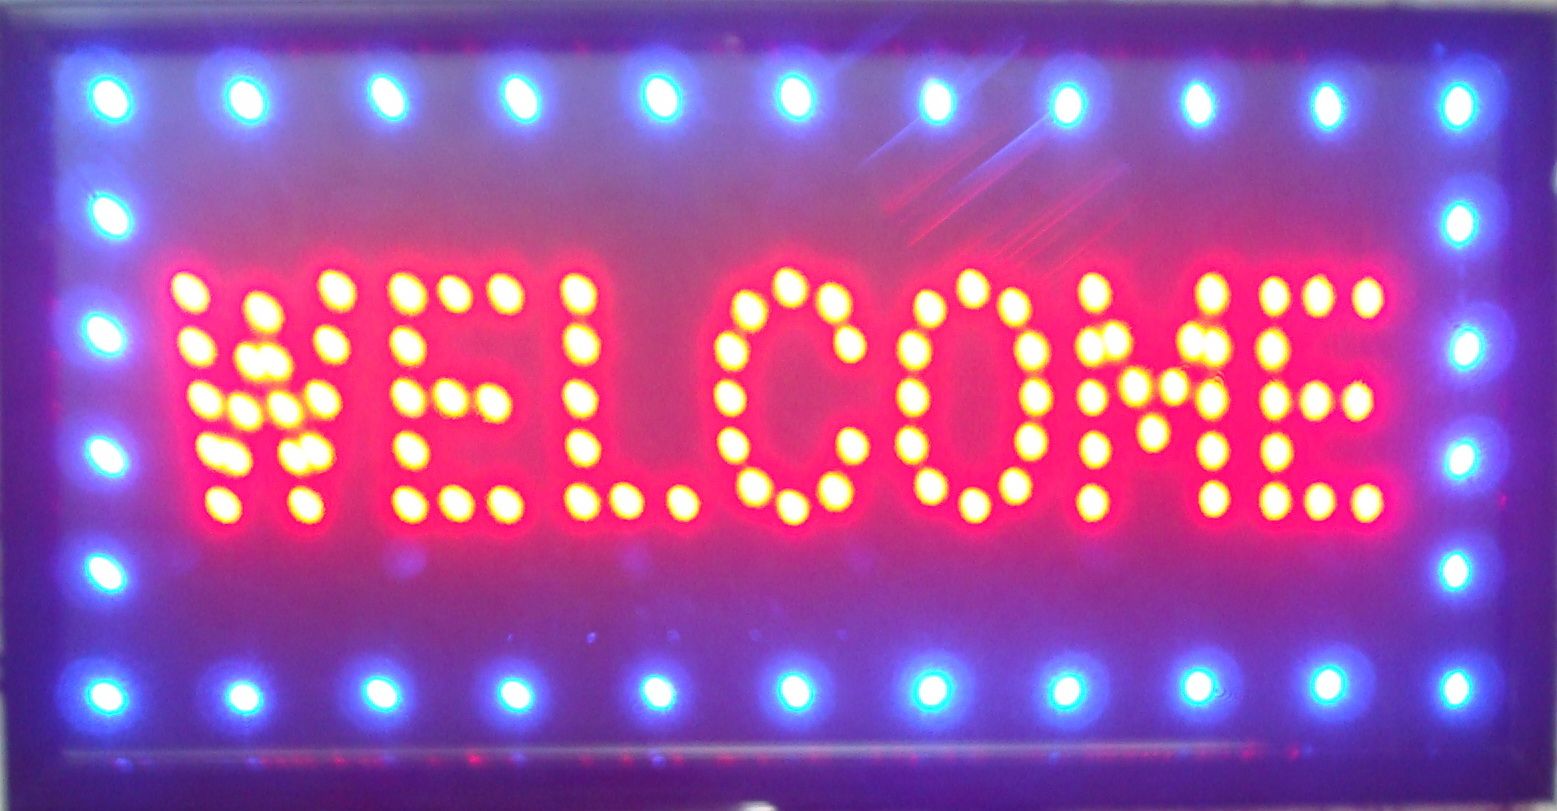 2018 2016 LED Neon Light Welcome Sign With Animation On ...